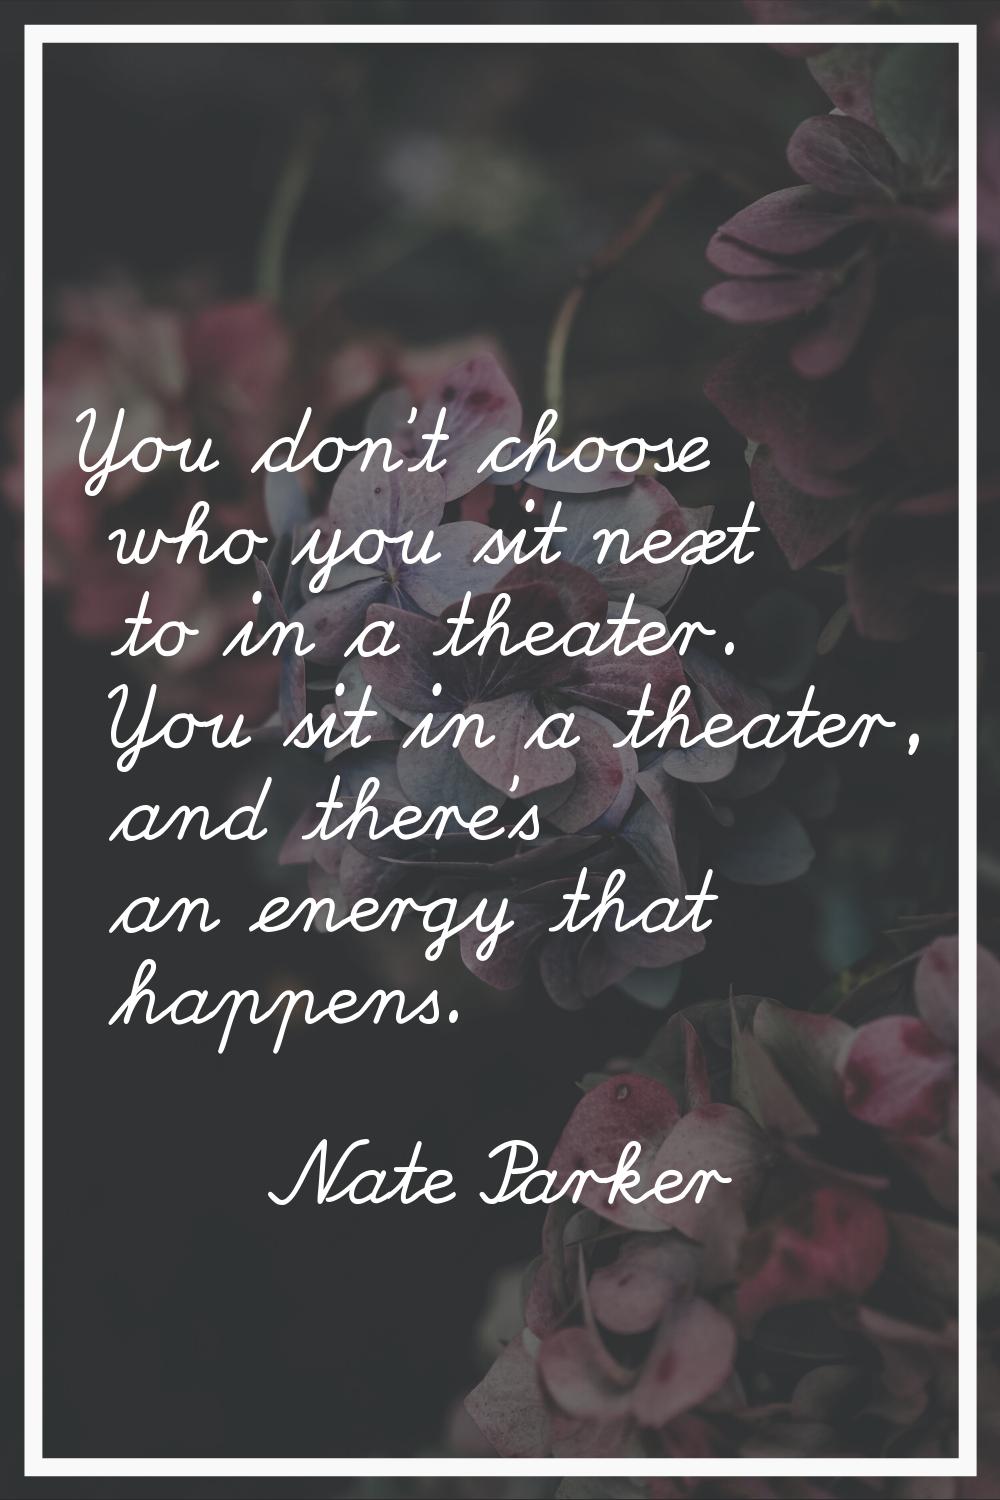 You don't choose who you sit next to in a theater. You sit in a theater, and there's an energy that